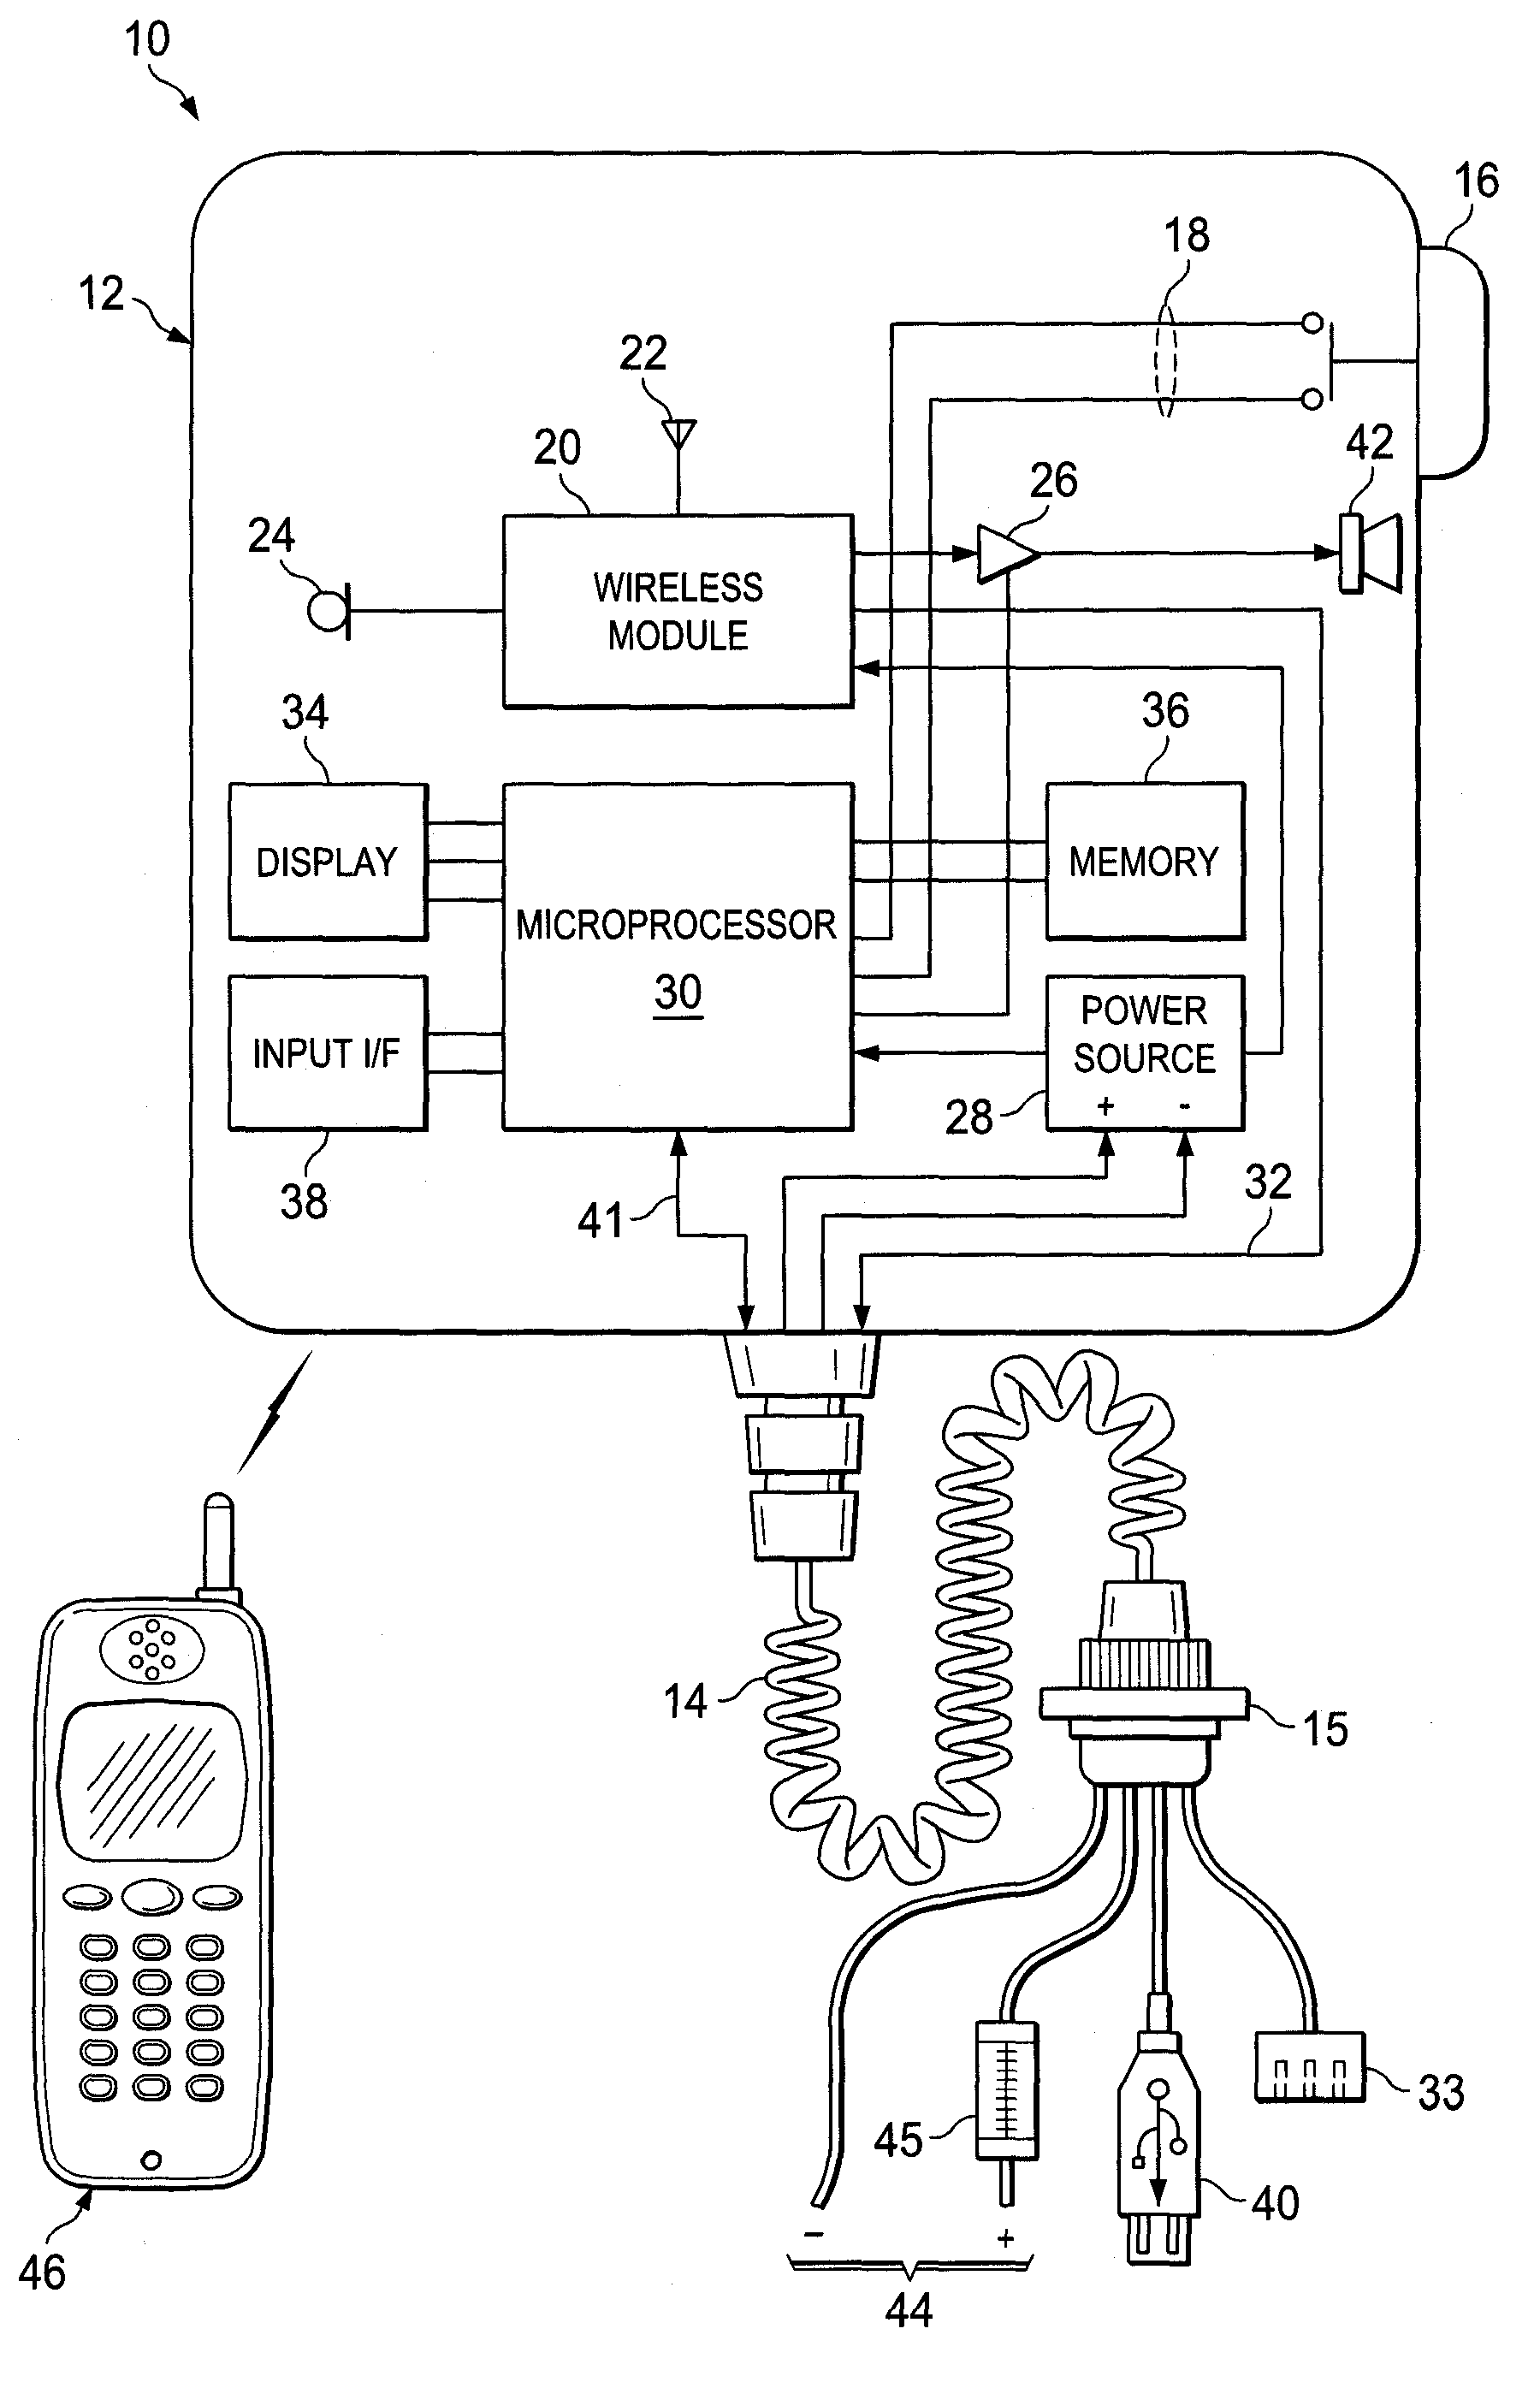 Marine communication device with wireless cellular telephone connectivity